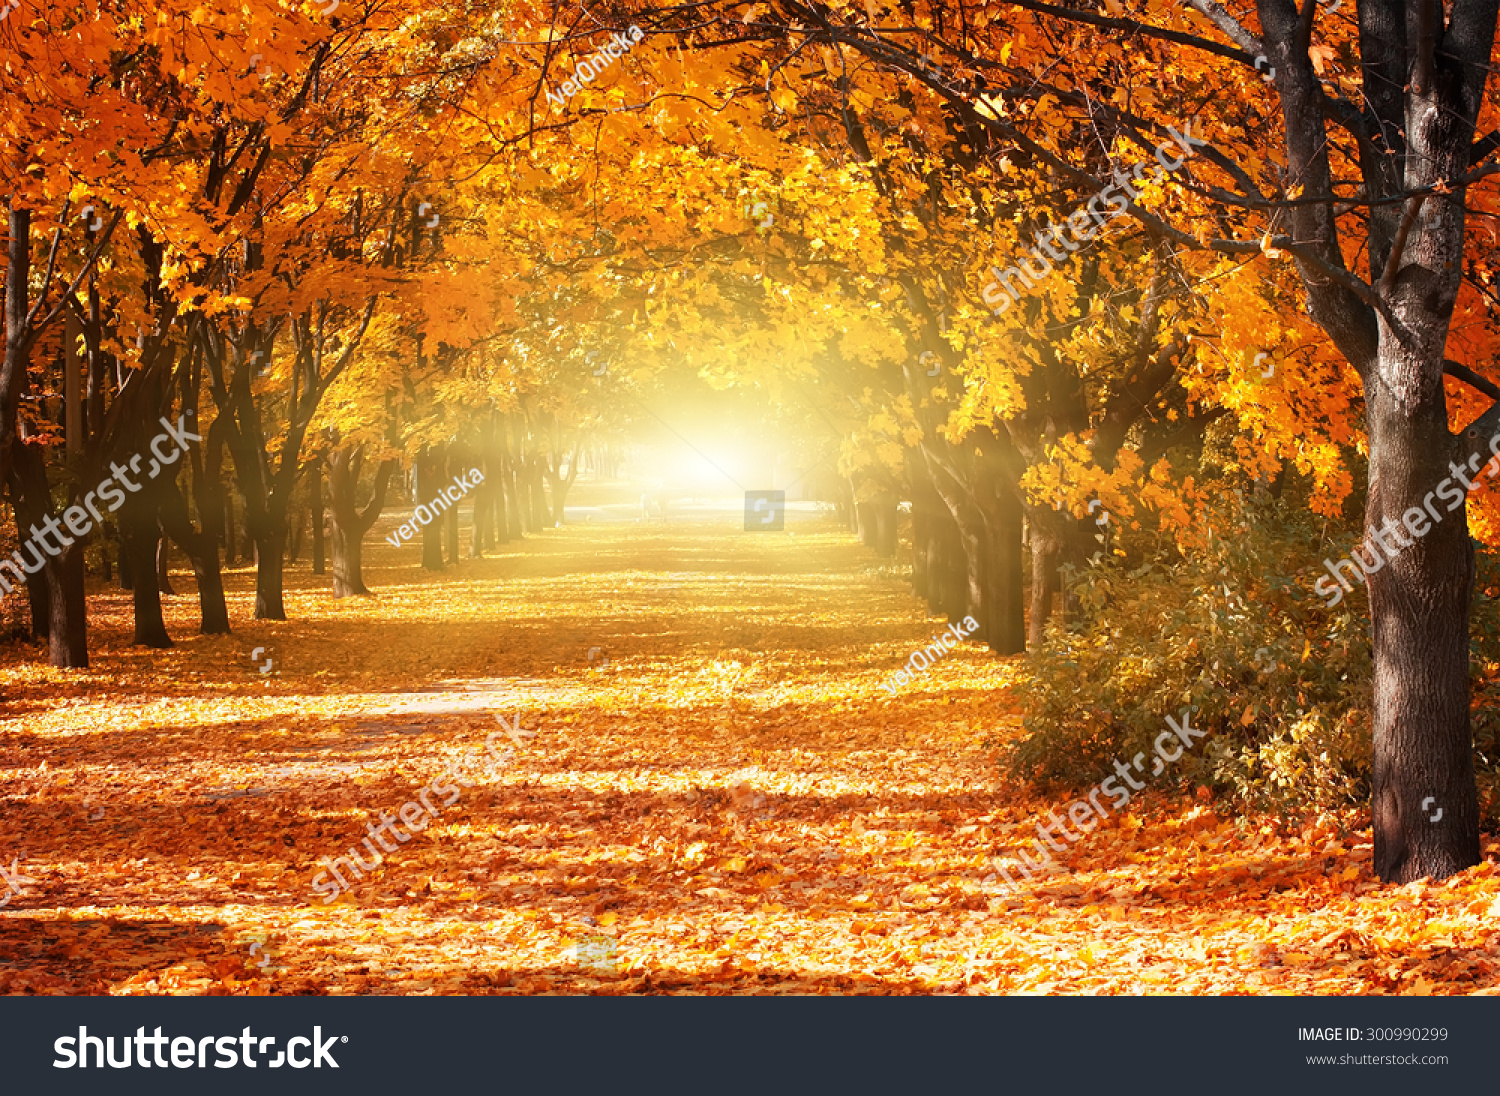 Beautiful romantic alley in a park with colorful trees and sunlight. autumn natural background #300990299